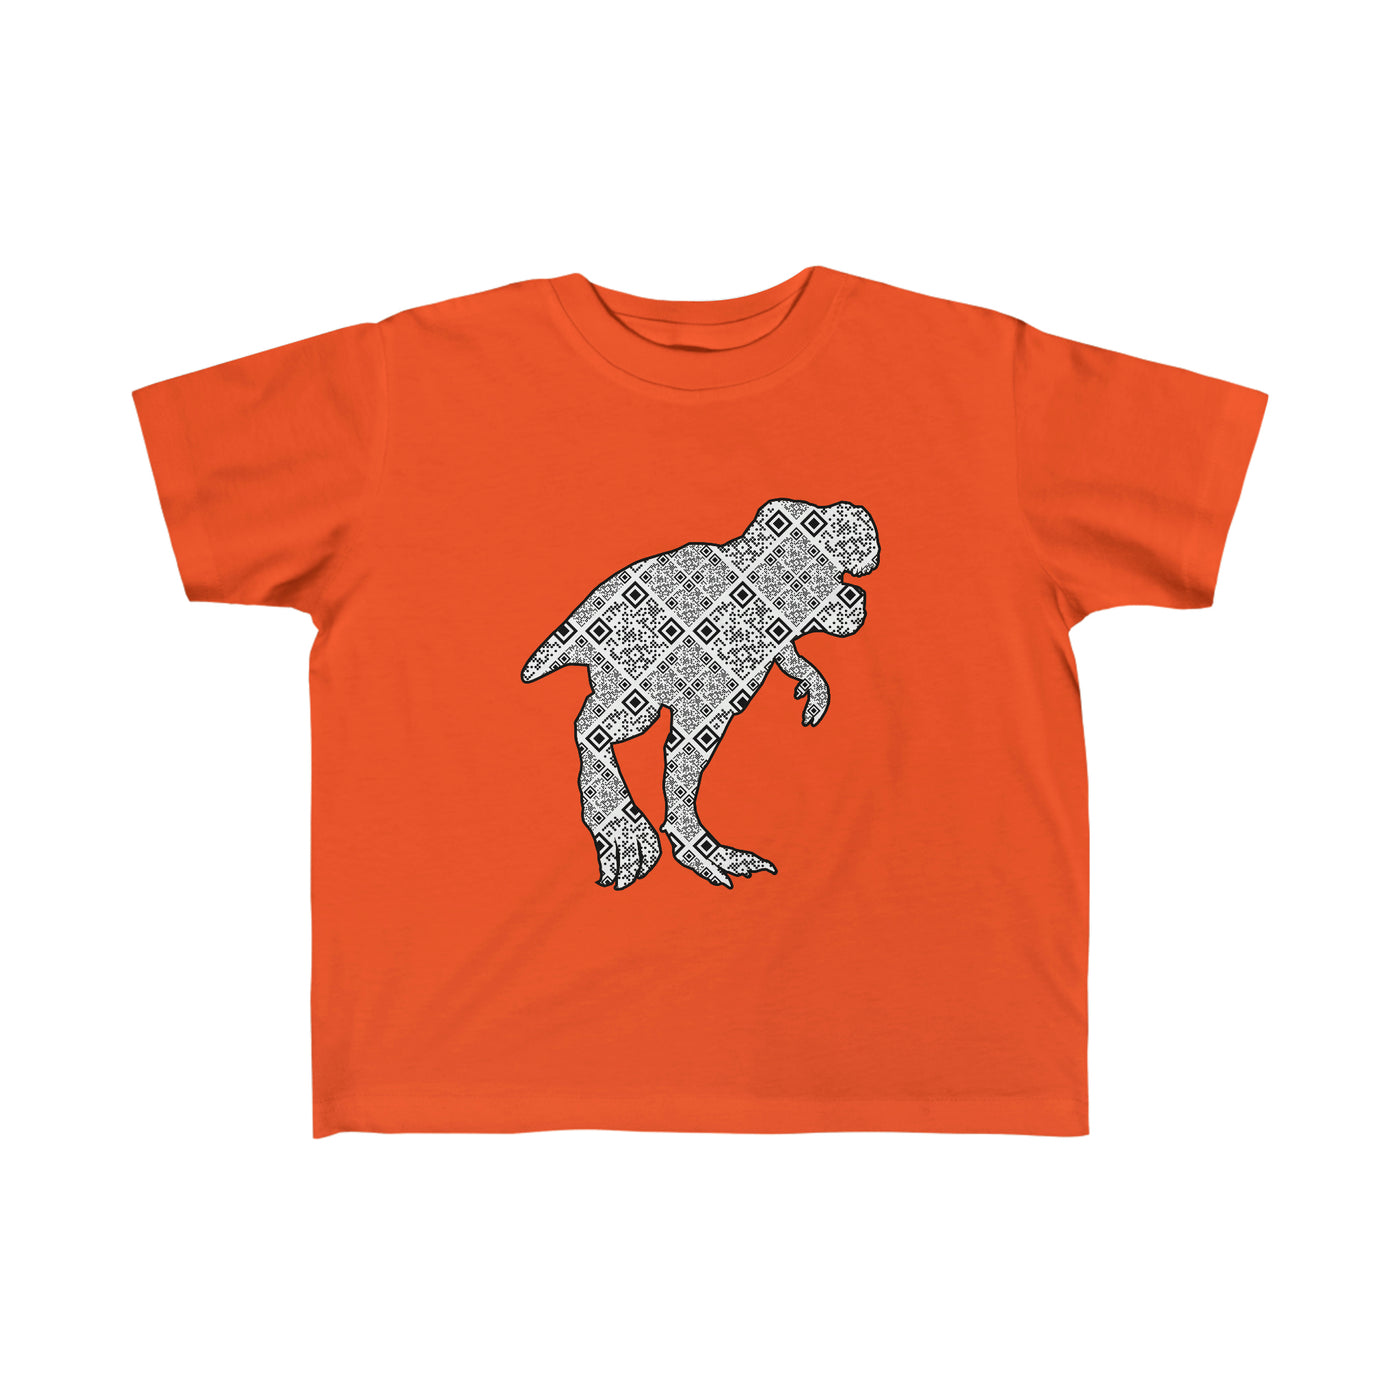 XR Reality Collection: Jurassic Stomp (Unisex) Toddler T-Shirt